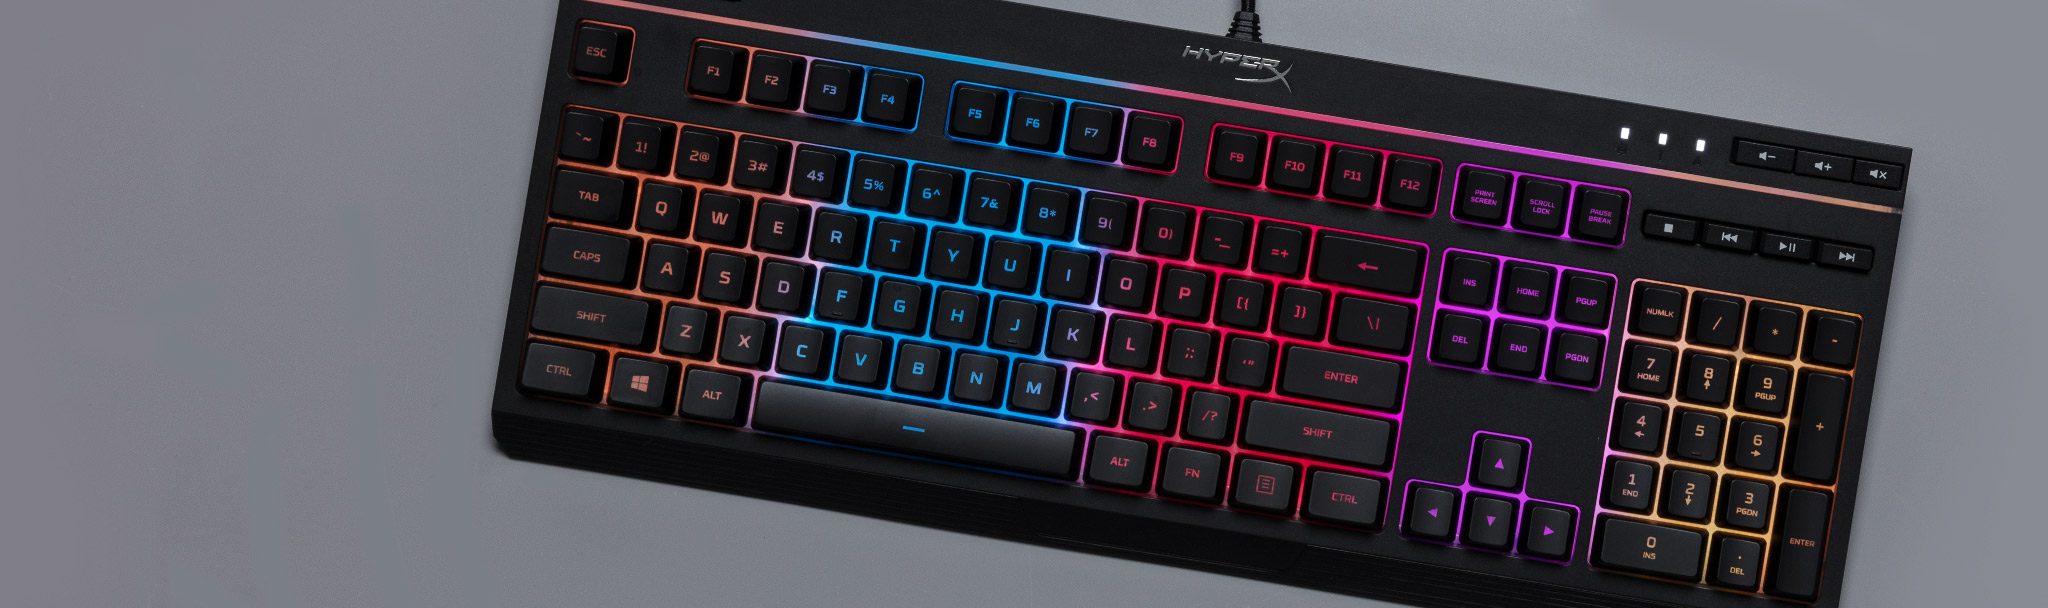 HyperX Alloy Core RGB Gaming Keyboard Review - Funky Kit